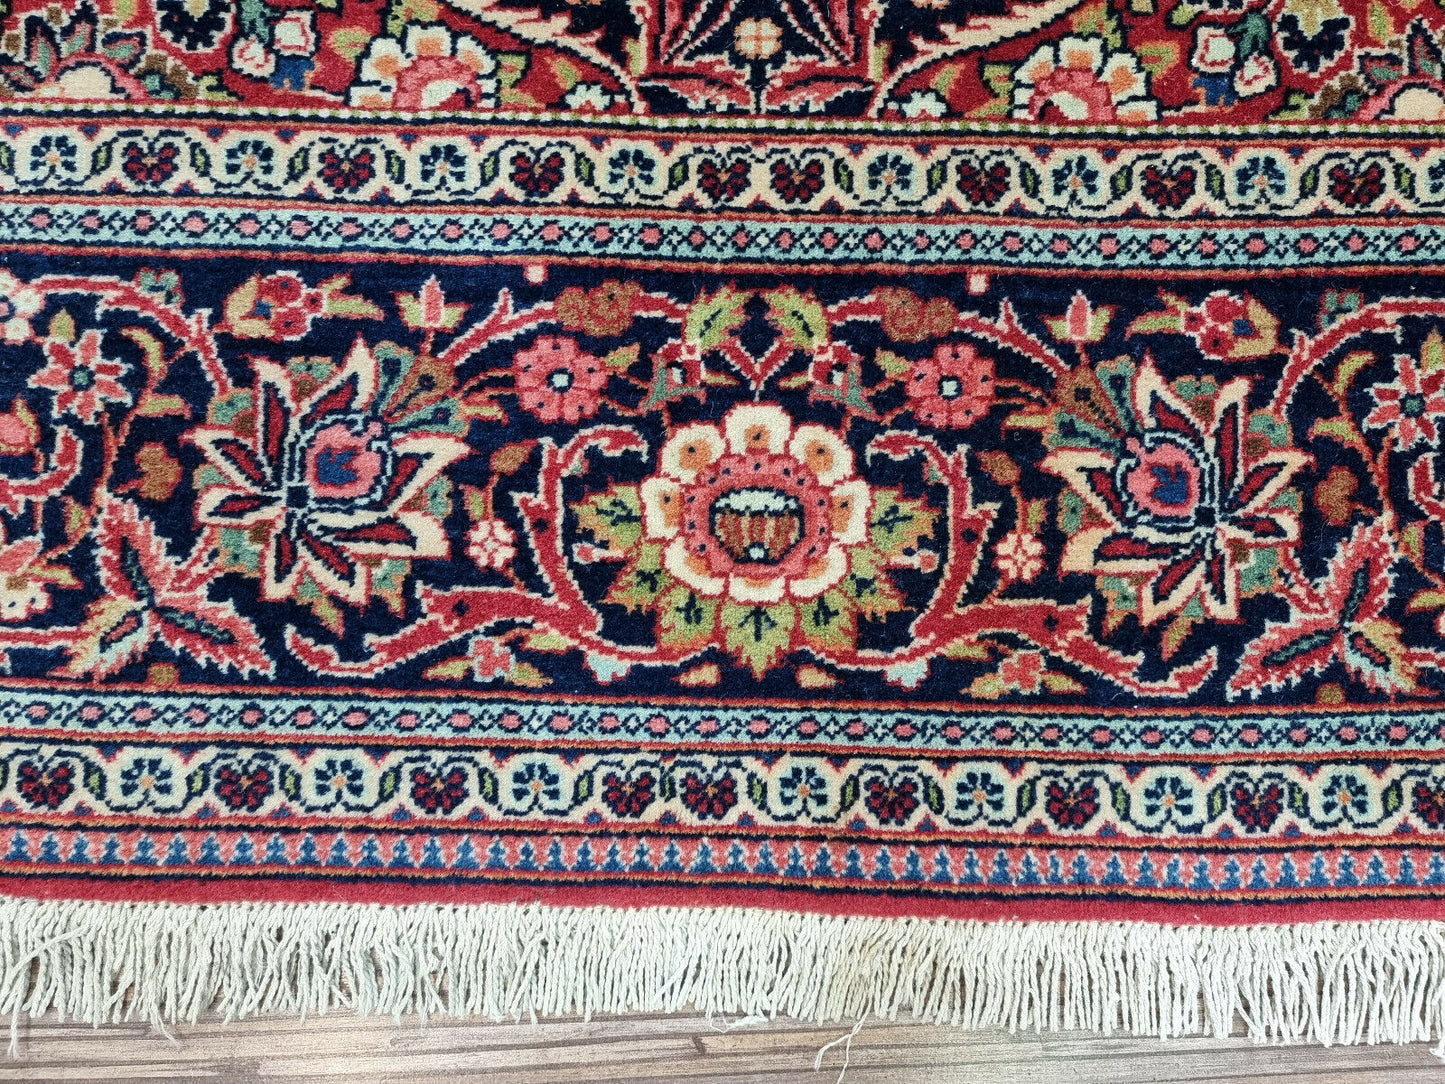  Close-up of floral motifs on Handmade Antique Persian Kashan Rug - Detailed view highlighting the intricate floral motifs within the rug's pattern.